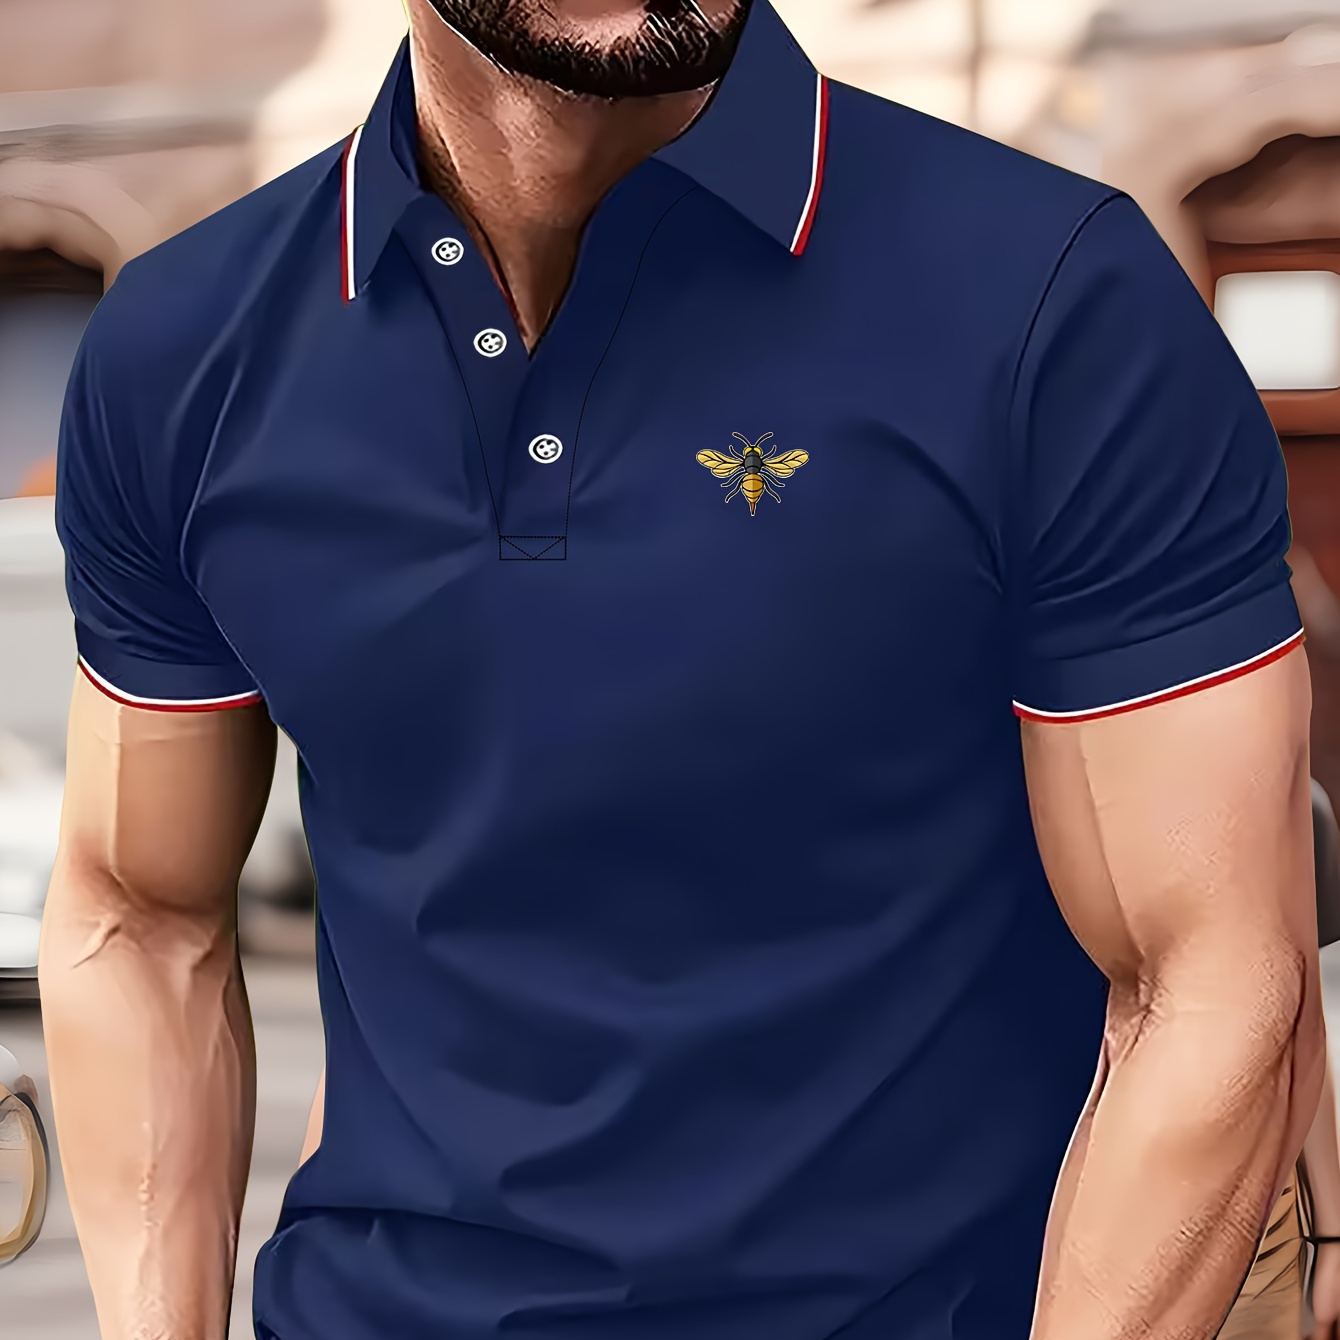 

Bee Print Summer Men's Fashionable Lapel Short Sleeve Golf T-shirt, Suitable For Commercial Entertainment Occasions, Such As Tennis And Golf, Men's Clothing, As Gifts